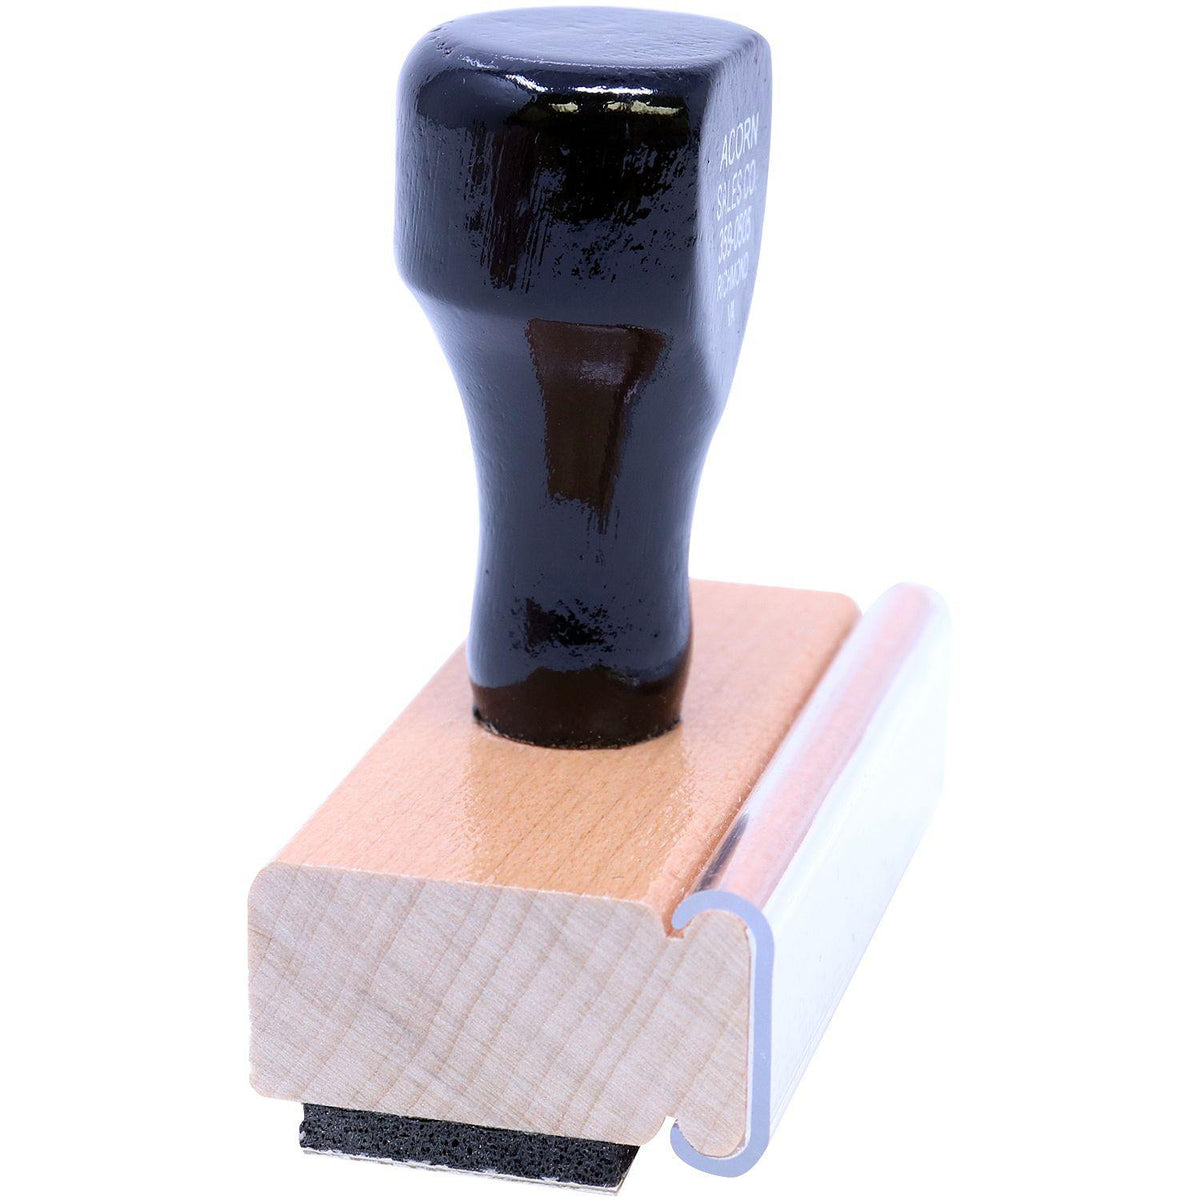 Rejected Rubber Stamp - Engineer Seal Stamps - Brand_Acorn, Impression Size_Small, Stamp Type_Regular Stamp, Type of Use_Office